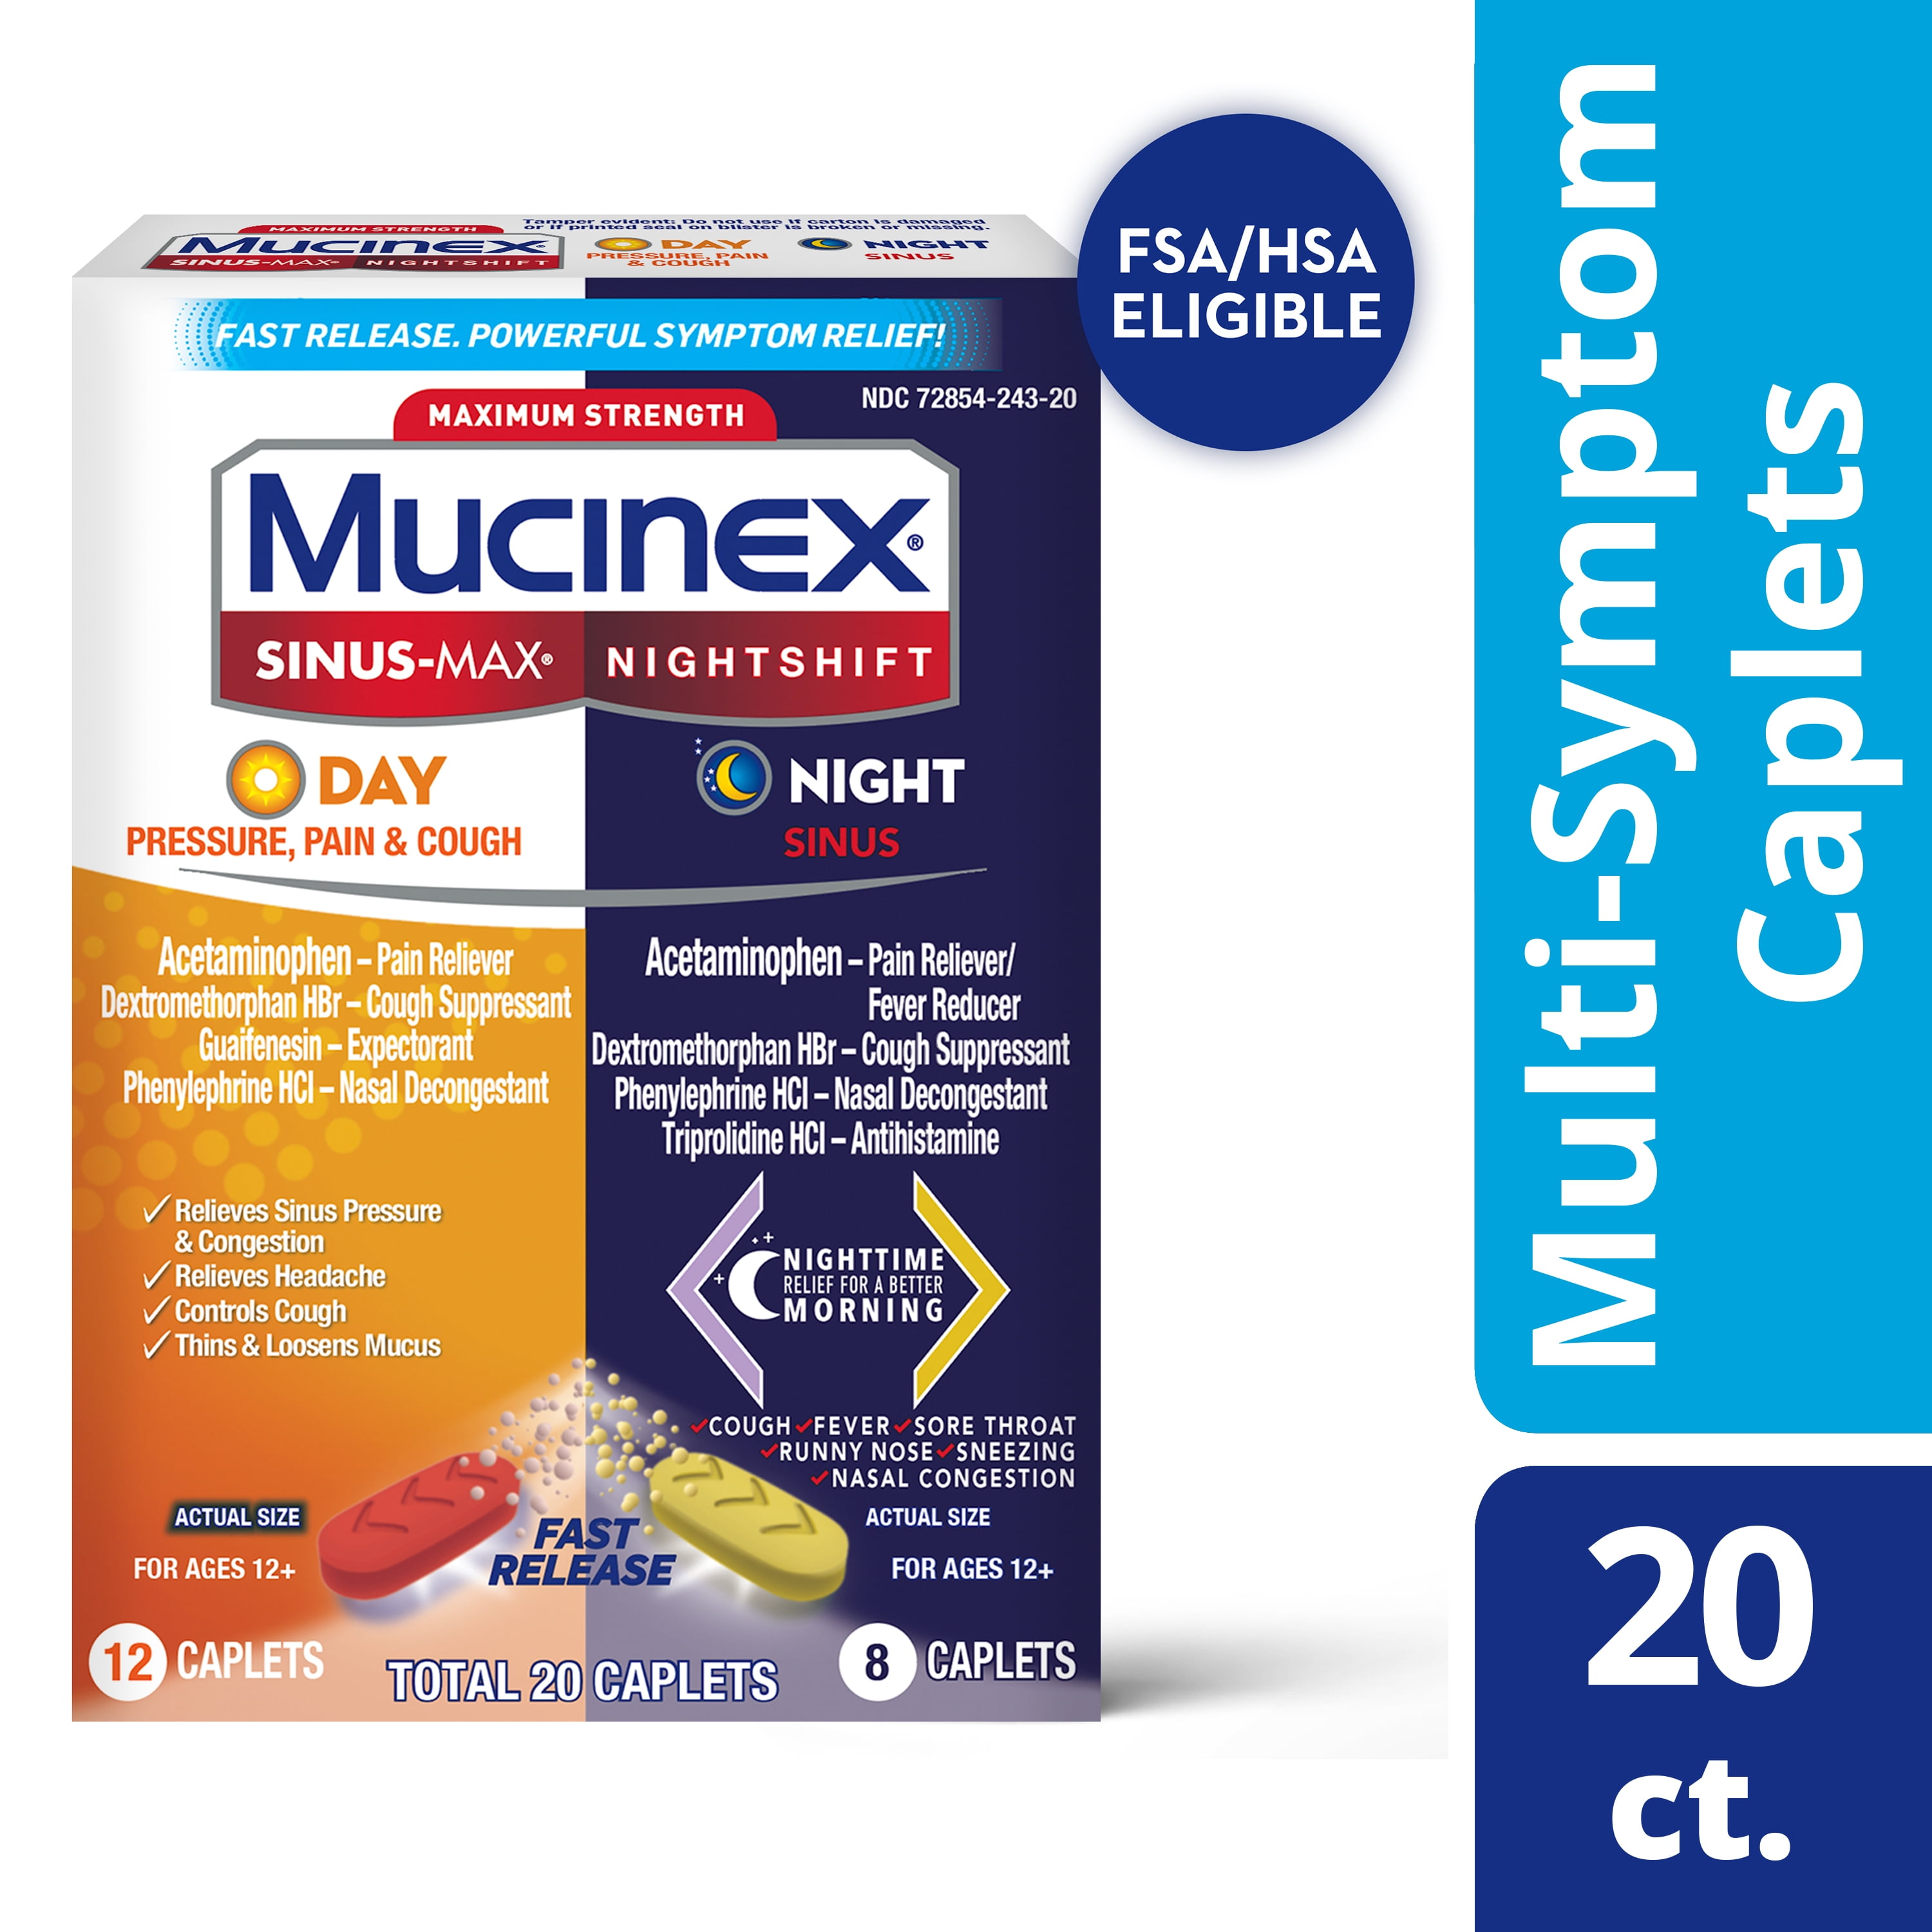 Maximum Strength Mucinex Sinus-Max (Day) Pressure, Pain & Cough & Nightshift (Night) Sinus Caplets, Fast Release, Powerful Multi-Symptom Relief, 20 caplets (12 Day time + 8 Night time)